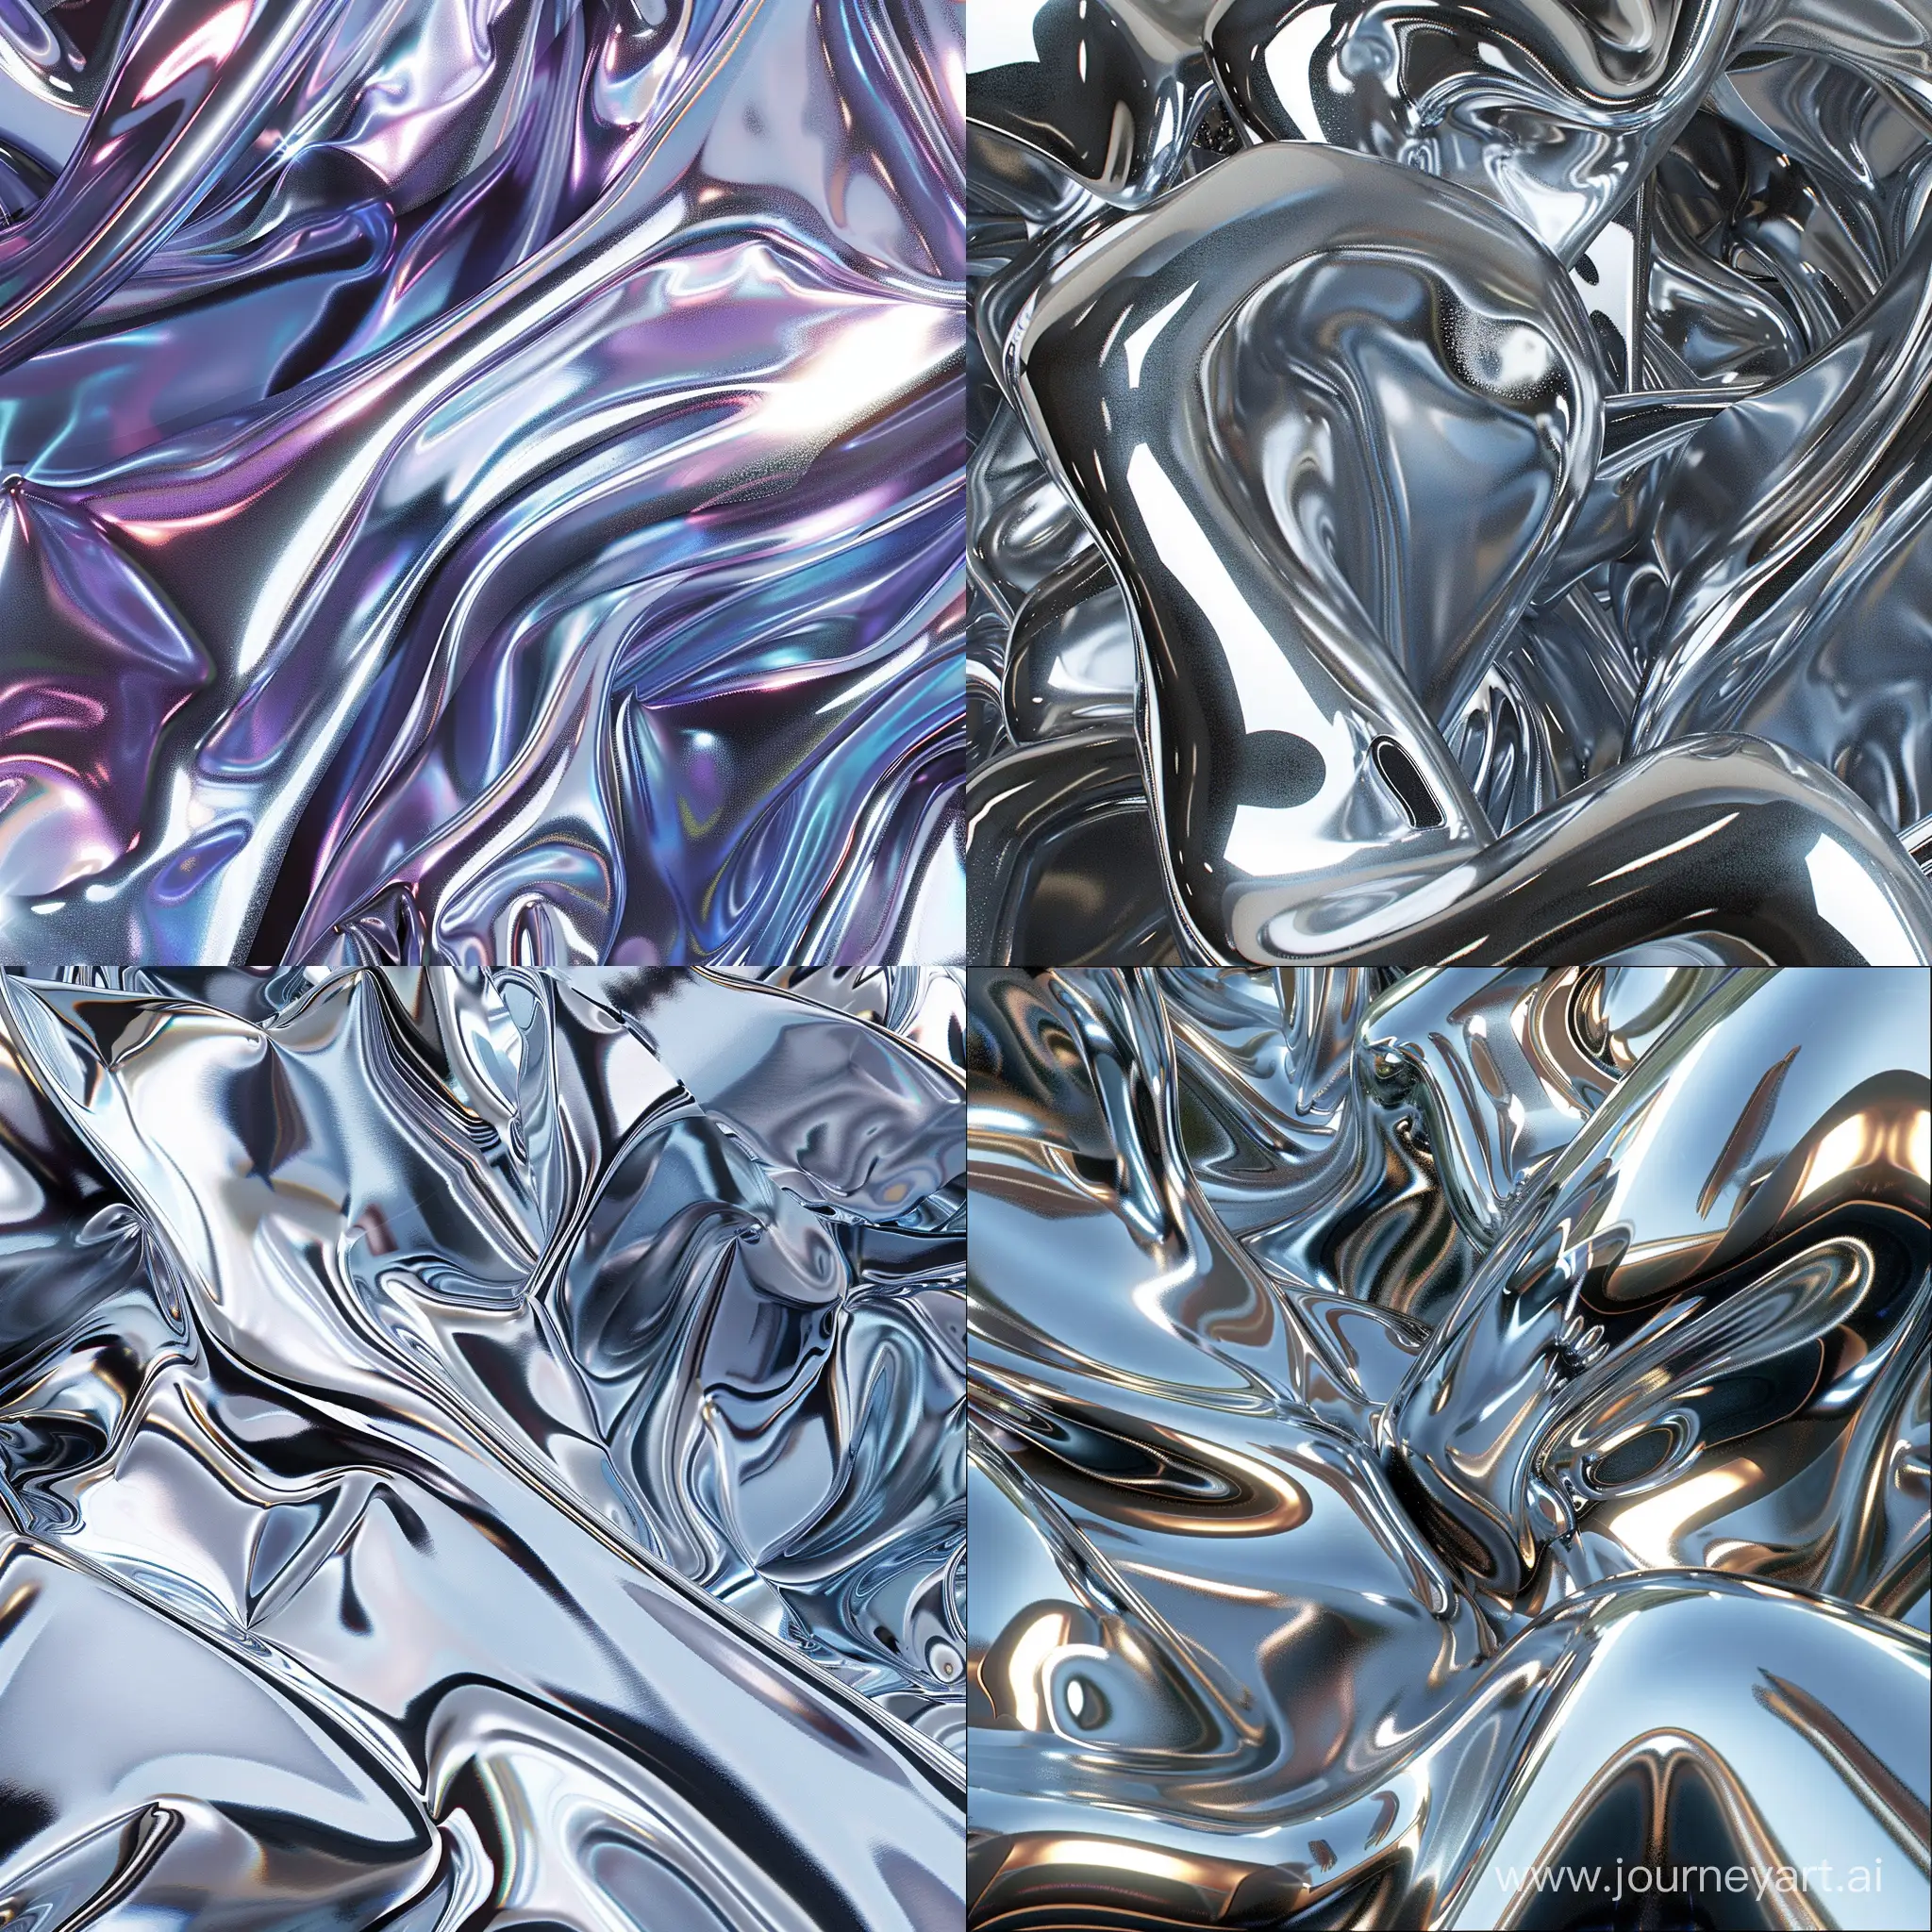 Futuristic-Holographic-Musical-Cover-with-Metallic-Chrome-Flowing-in-3D-Metal